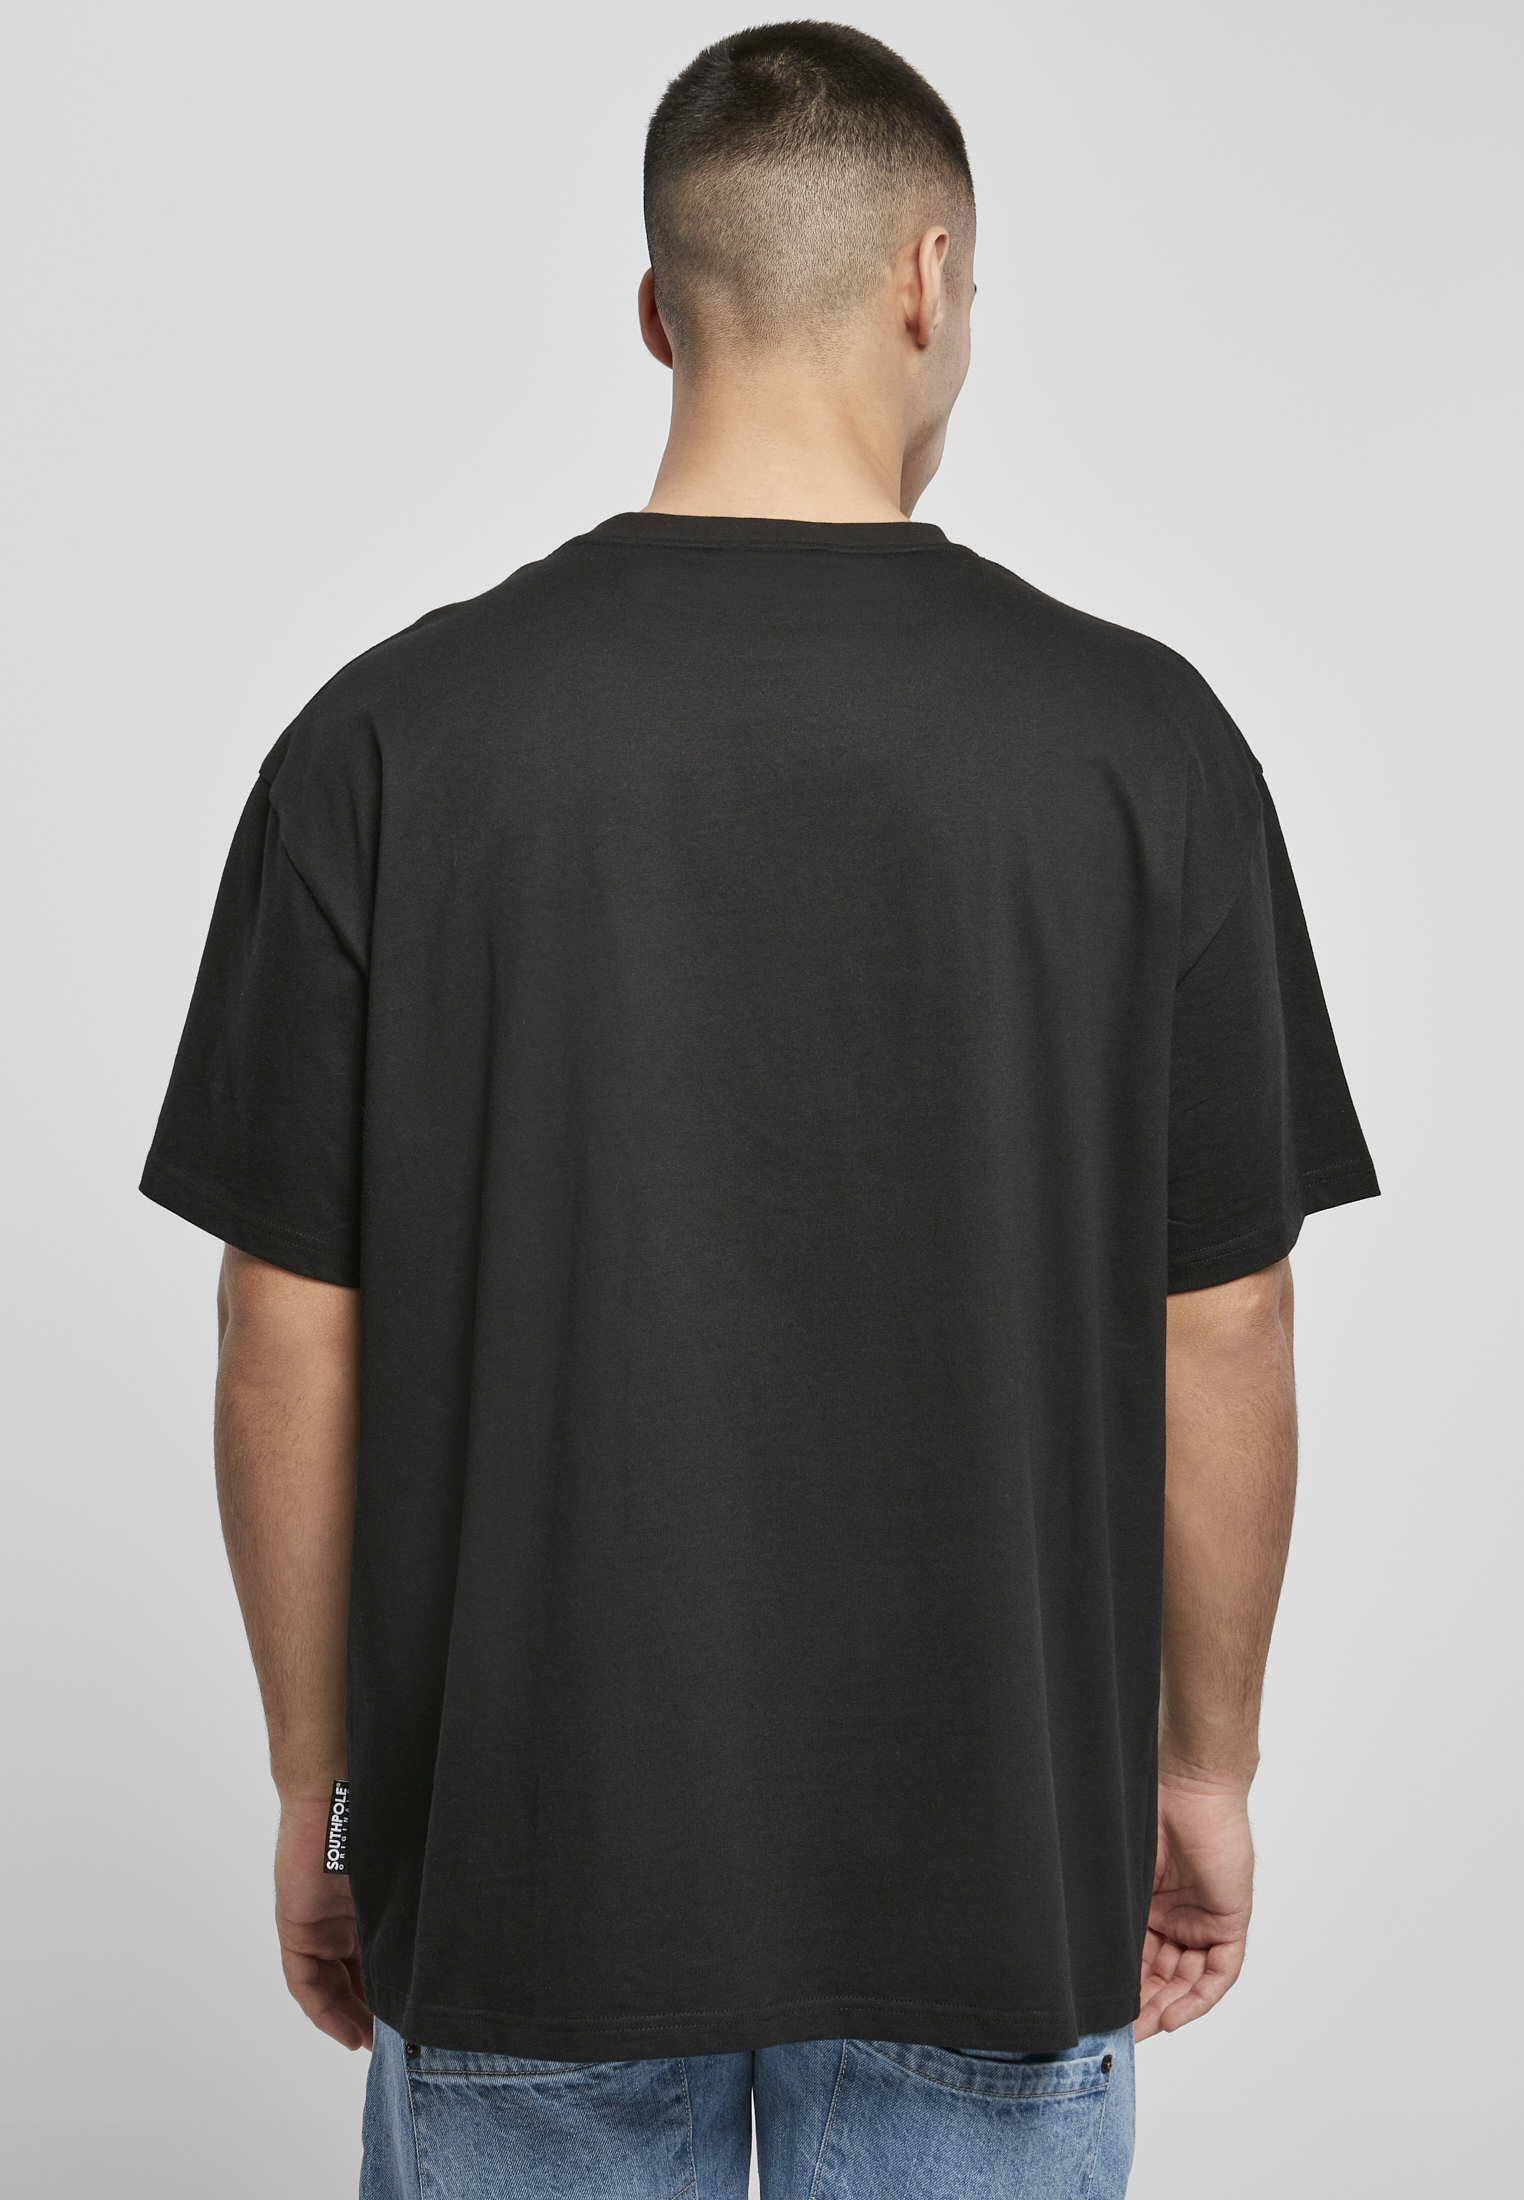 Nos Kollektion Southpole 3D Tee in Farbe black